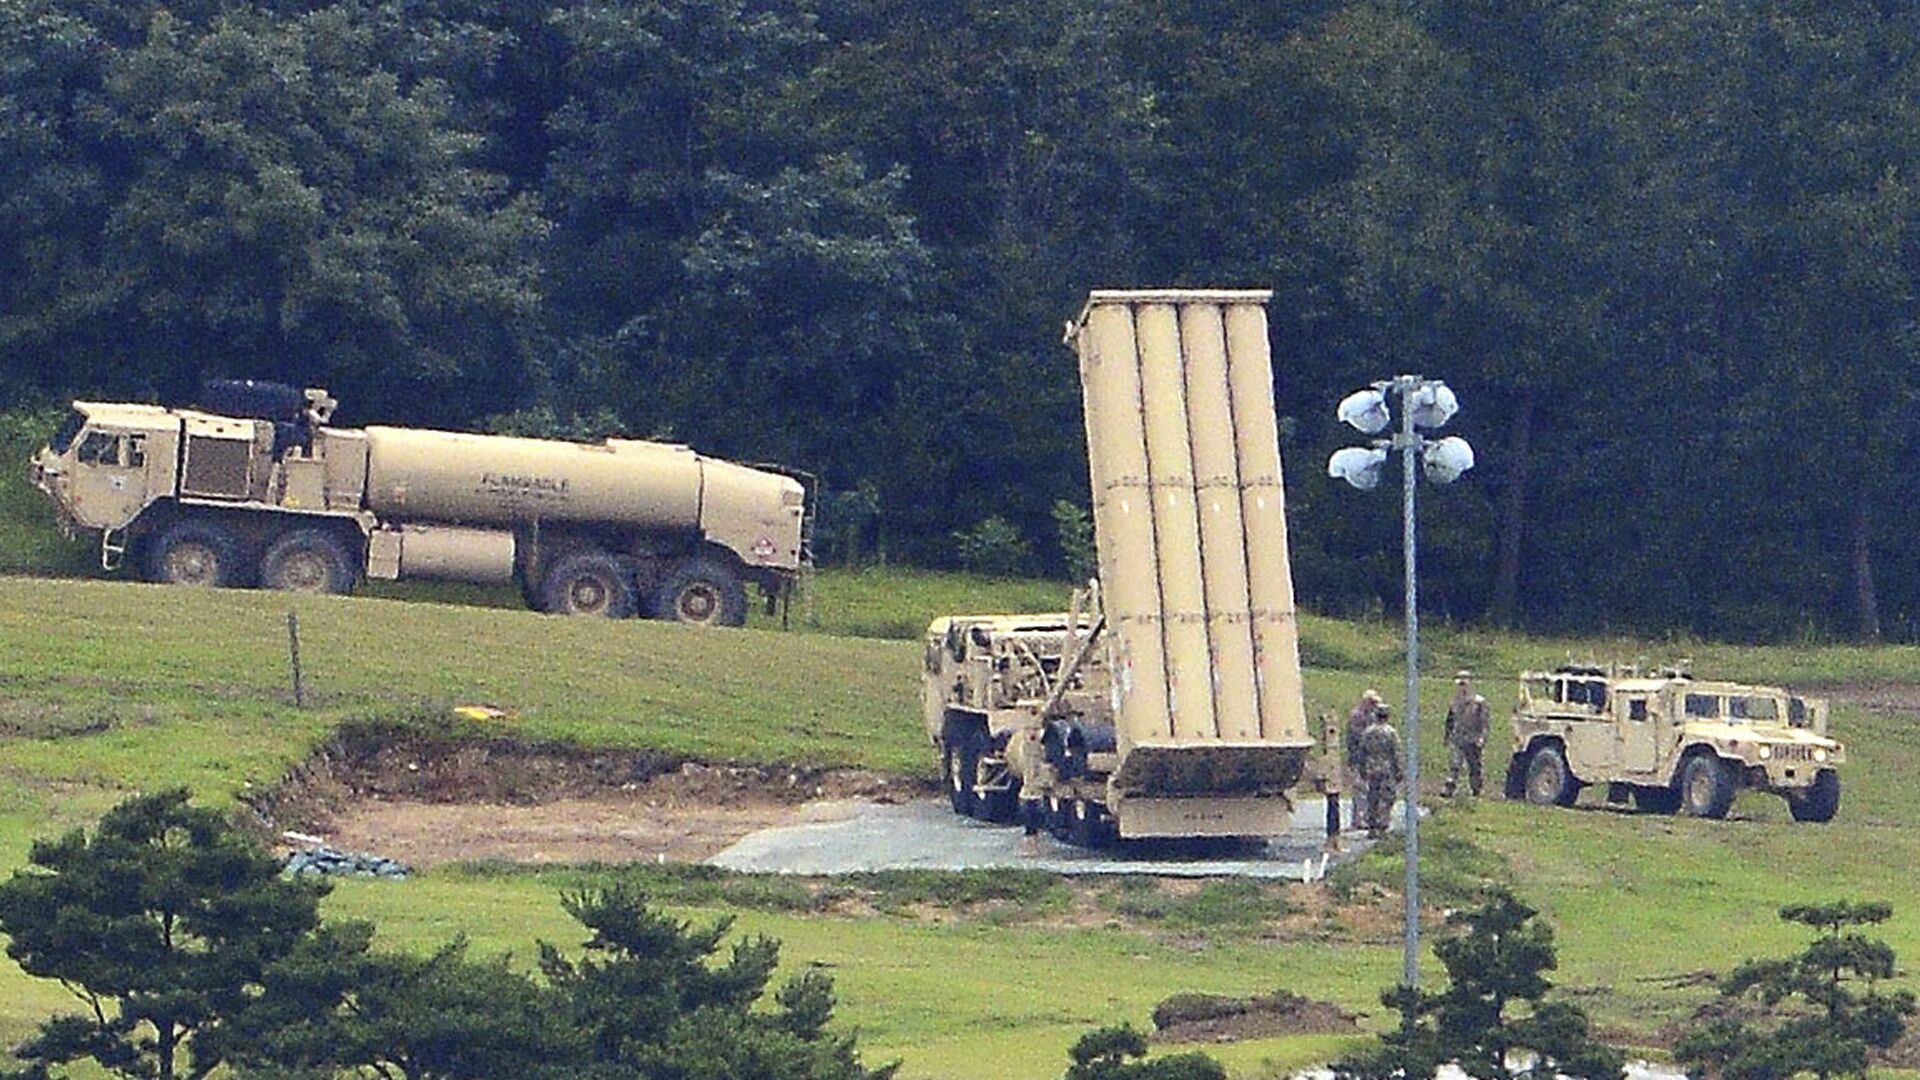 U.S. missile defense system called Terminal High Altitude Area Defense, or THAAD, is seen at a golf course in Seongju, South Korea, Wednesday, Sept. 6, 2017 - Sputnik International, 1920, 22.01.2022